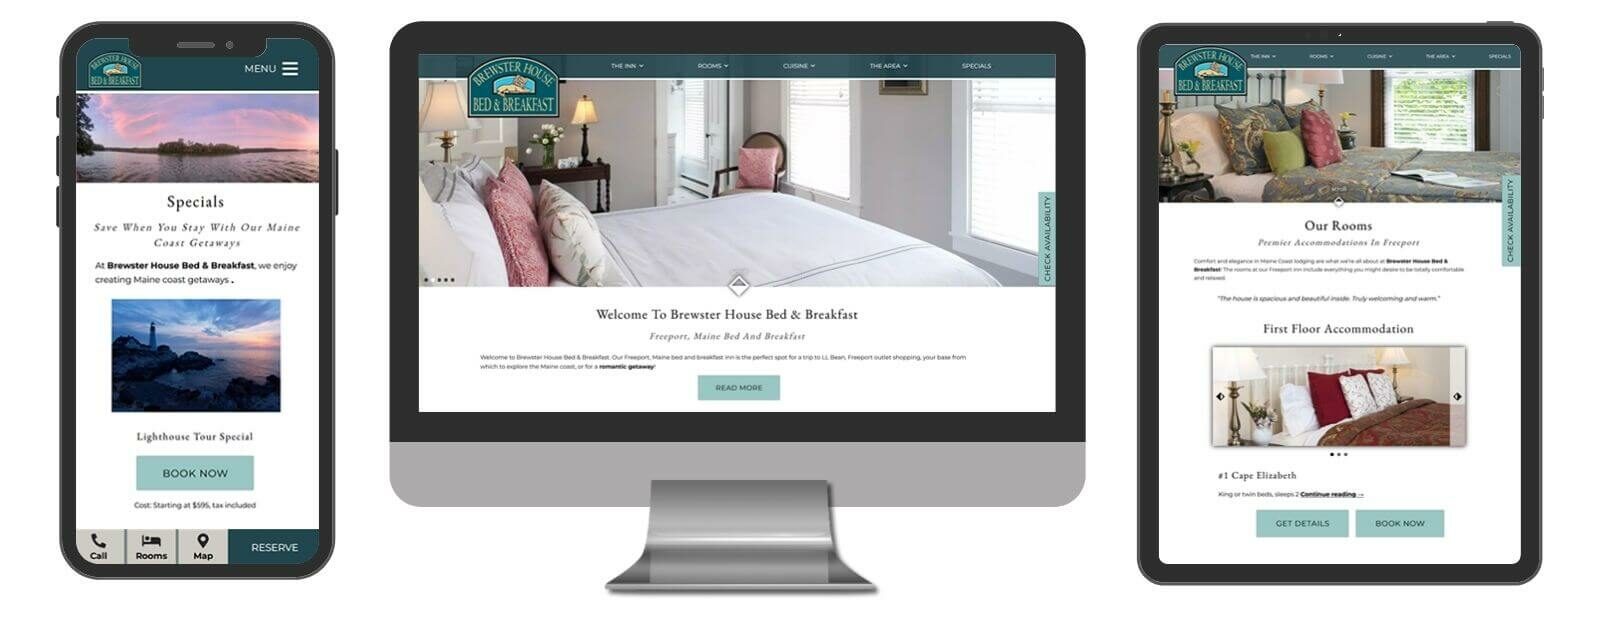 Screenshot of Desktop, Mobile and tablet views of the website for Brewster House Bed & Breakfast